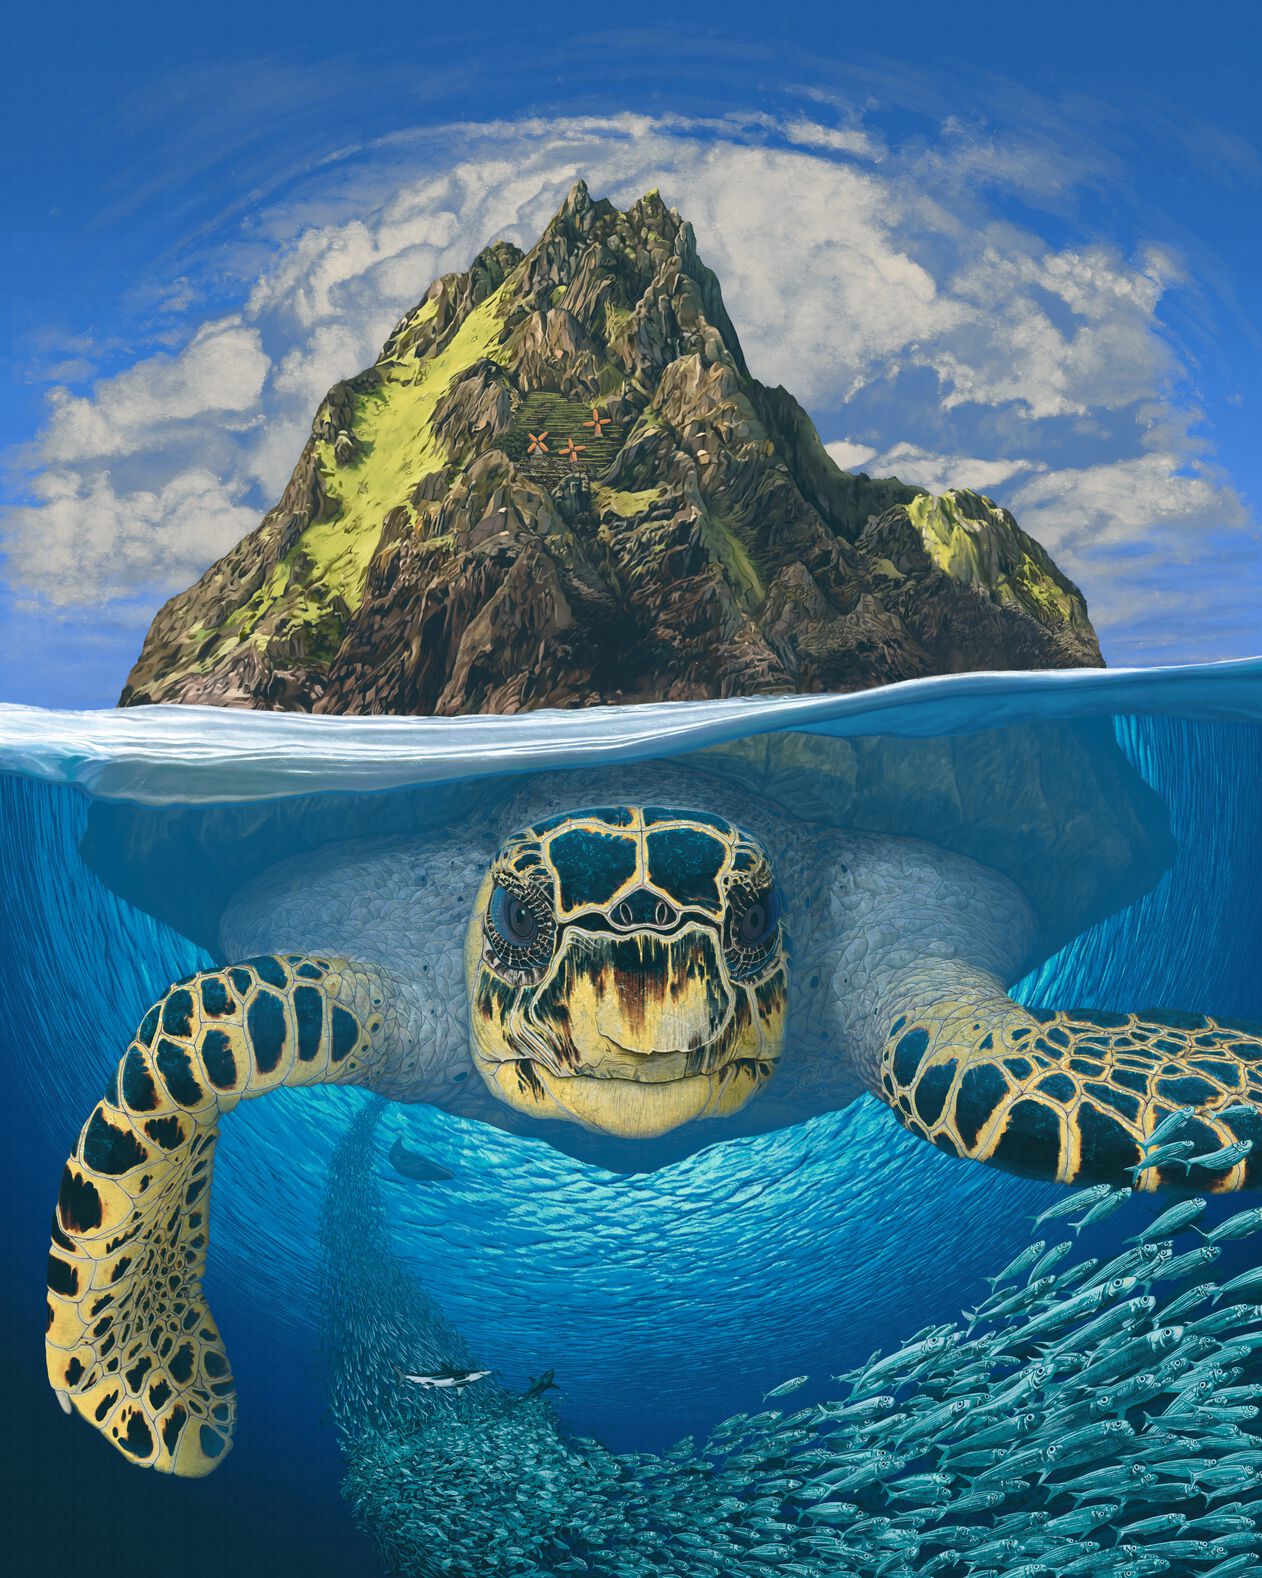 A view of a gigantic turtle with a rocky island on its shell swimming through the ocean; an extremely long school of sardines as far as the eye can see is swimming straight toward the camera; a small settlement can be seen on the island with windmills and terraced farming